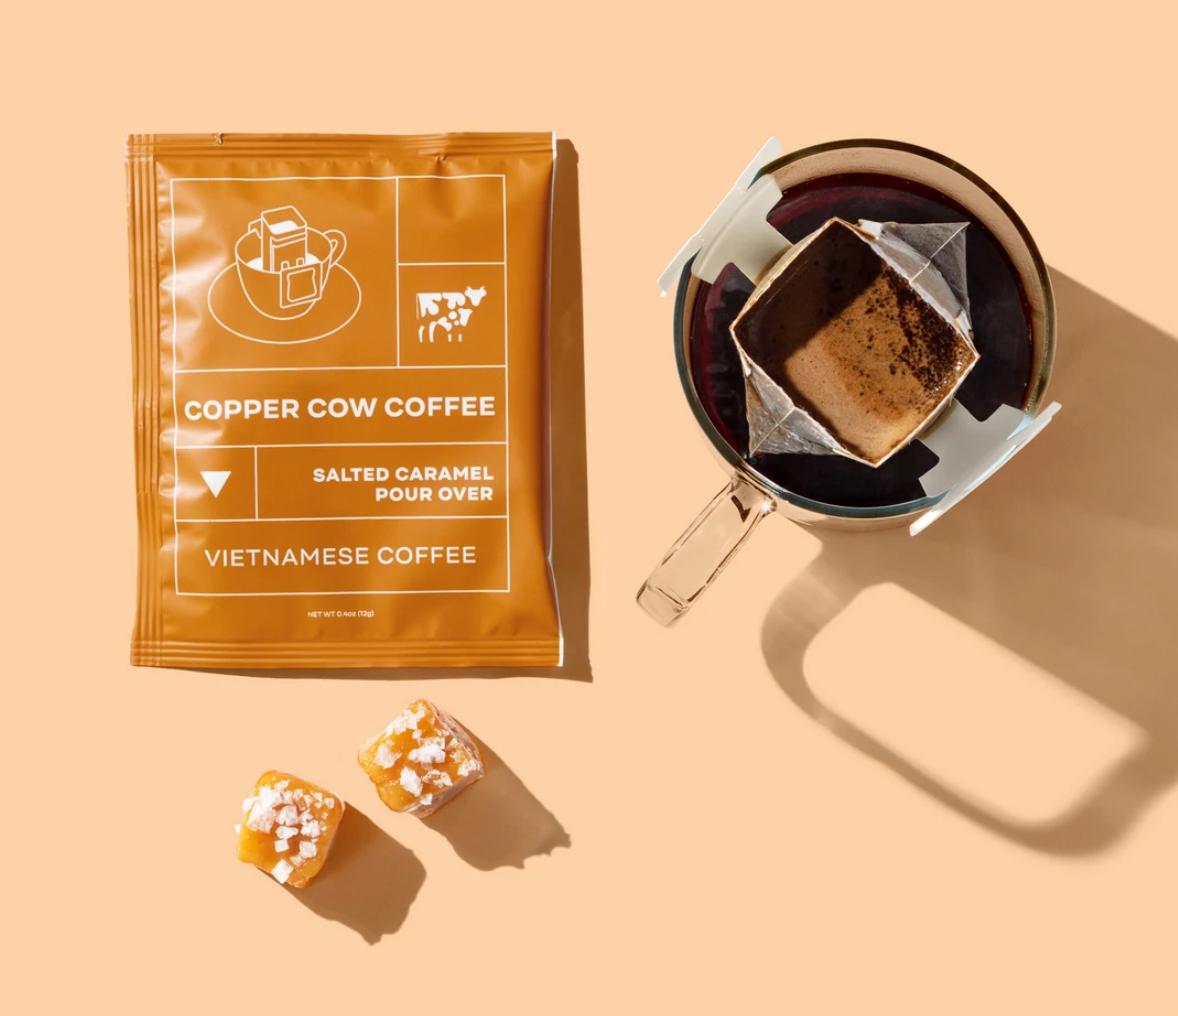 Copper Cow Salted Caramel Coffee